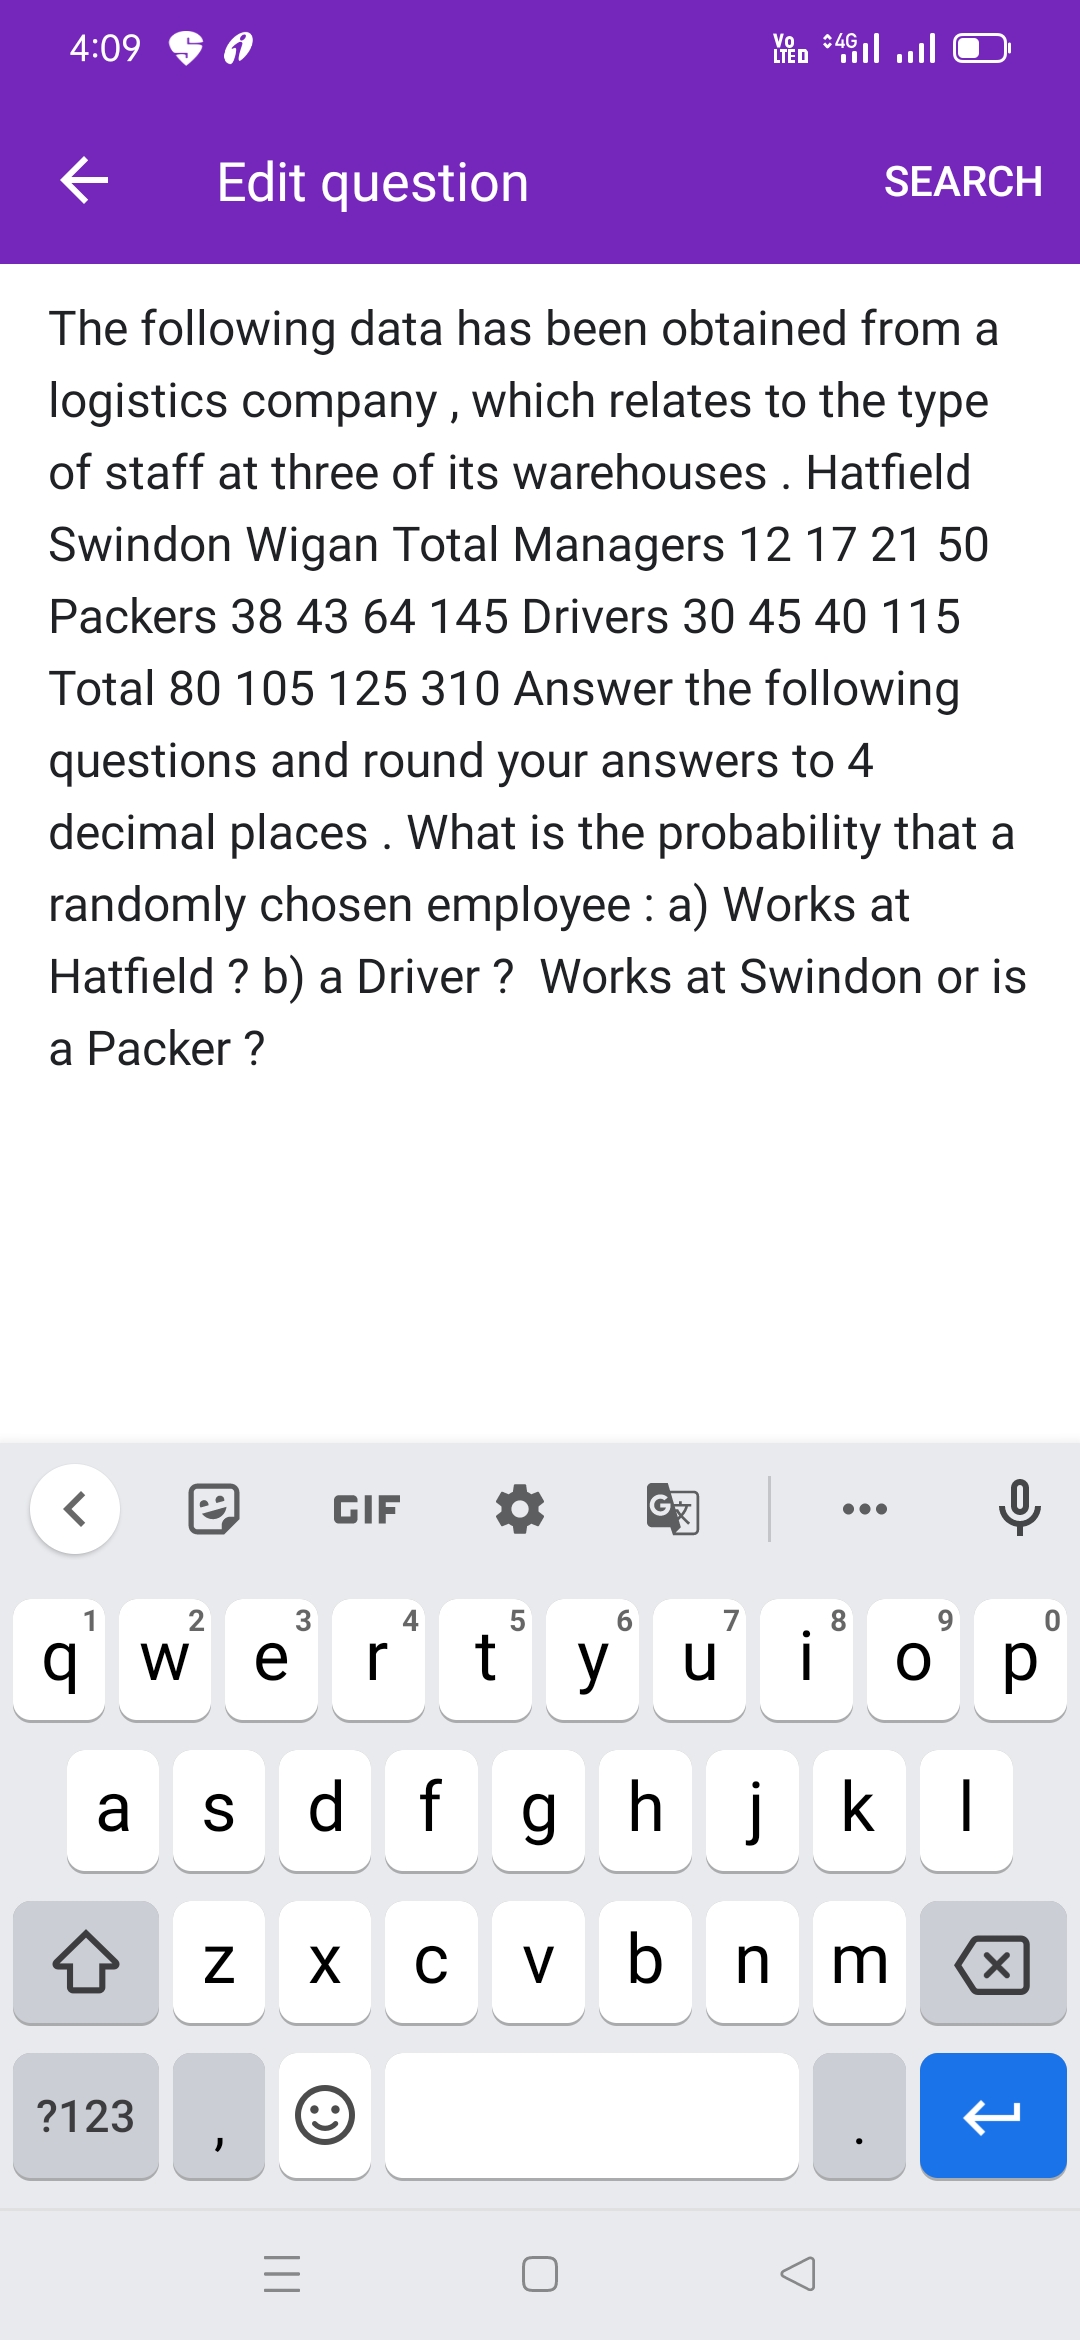 4:09
:4G
Vo
LIED 4il l
Edit question
SEARCH
The following data has been obtained from a
logistics company , which relates to the type
of staff at three of its warehouses . Hatfield
Swindon Wigan Total Managers 12 17 21 50
Packers 38 43 64 145 Drivers 30 45 40 115
Total 80 105 125 310 Answer the following
questions and round your answers to 4
decimal places. What is the probability that a
randomly chosen employee : a) Works at
Hatfield ? b) a Driver ? Works at Swindon or is
a Рacker ?
GIF
1
2
6
7
8.
q w
o p
ор
a s d fghjkI
V
?123
91
|||
